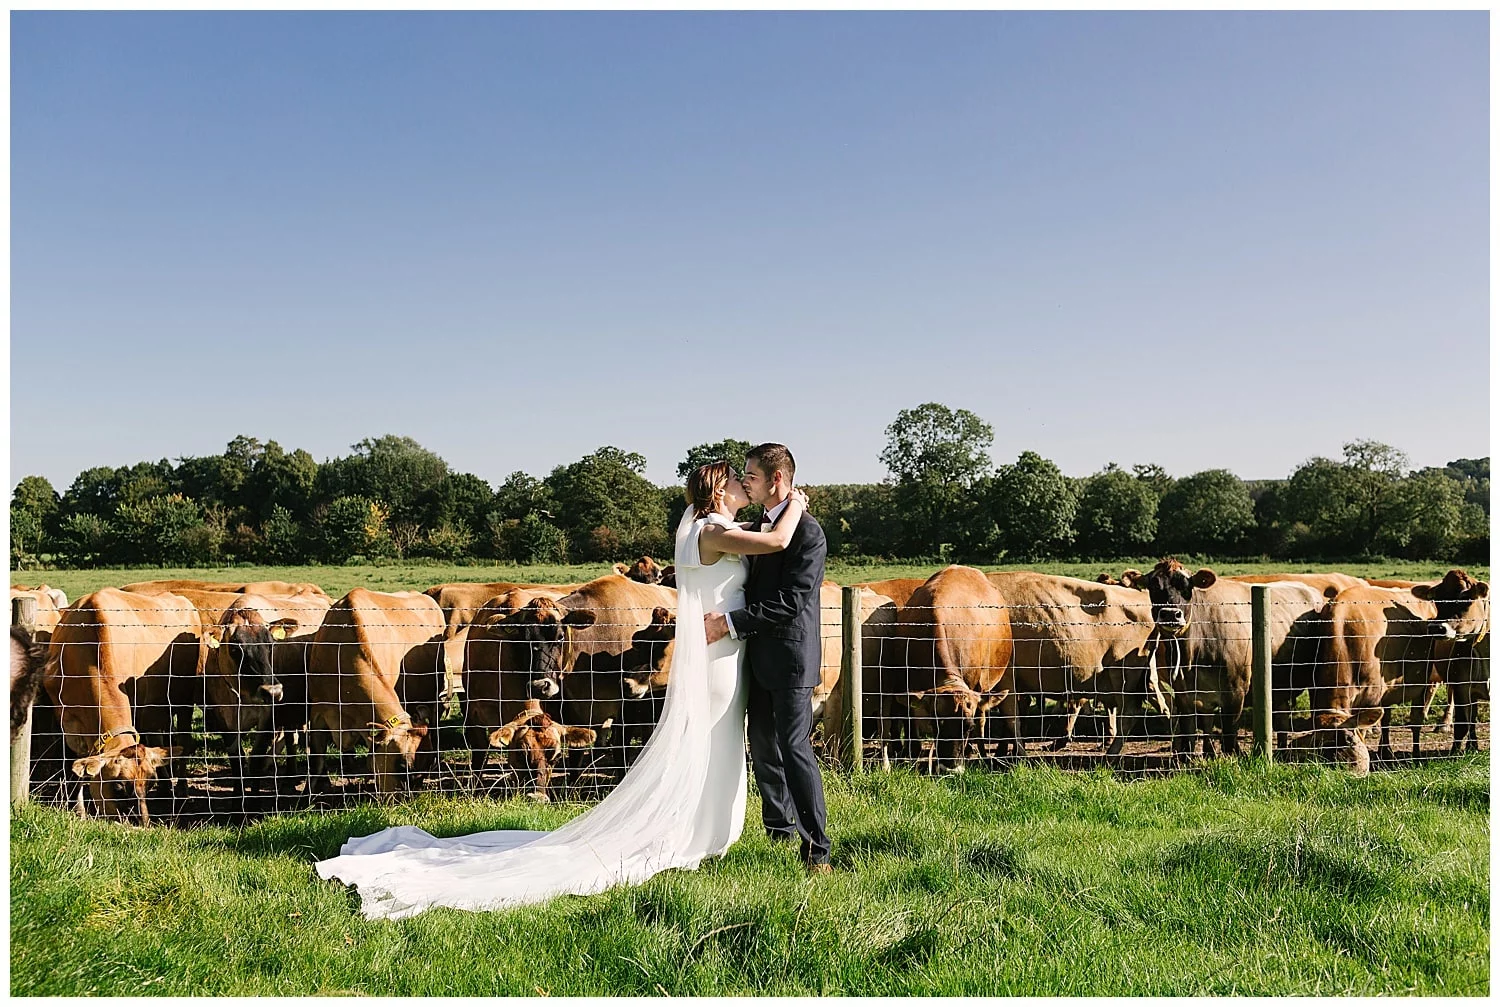 Staffordshire wedding photography; newly married farmer couple with their cows